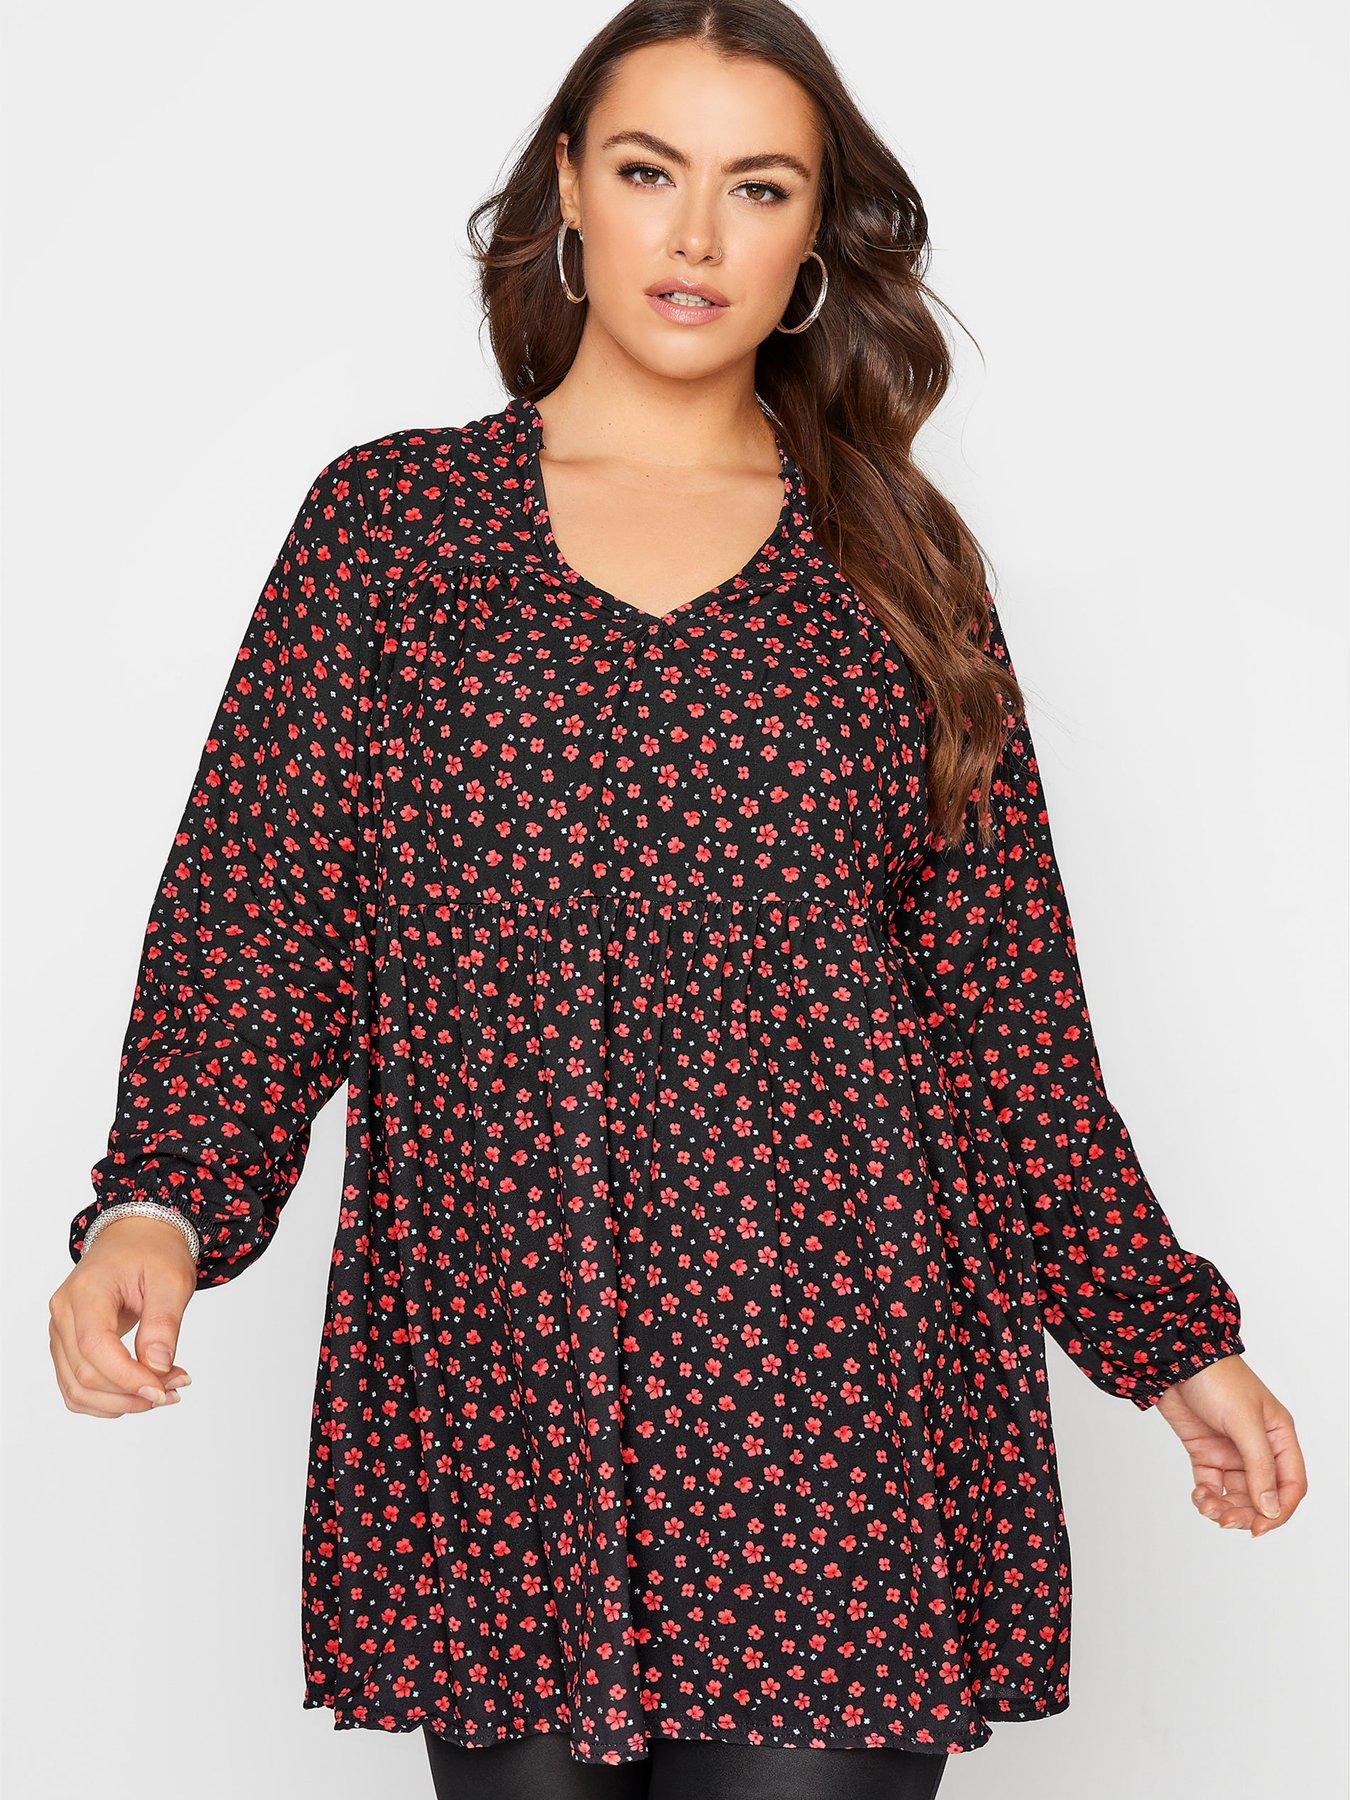  Yours Ditsy Floral Smock Tunic